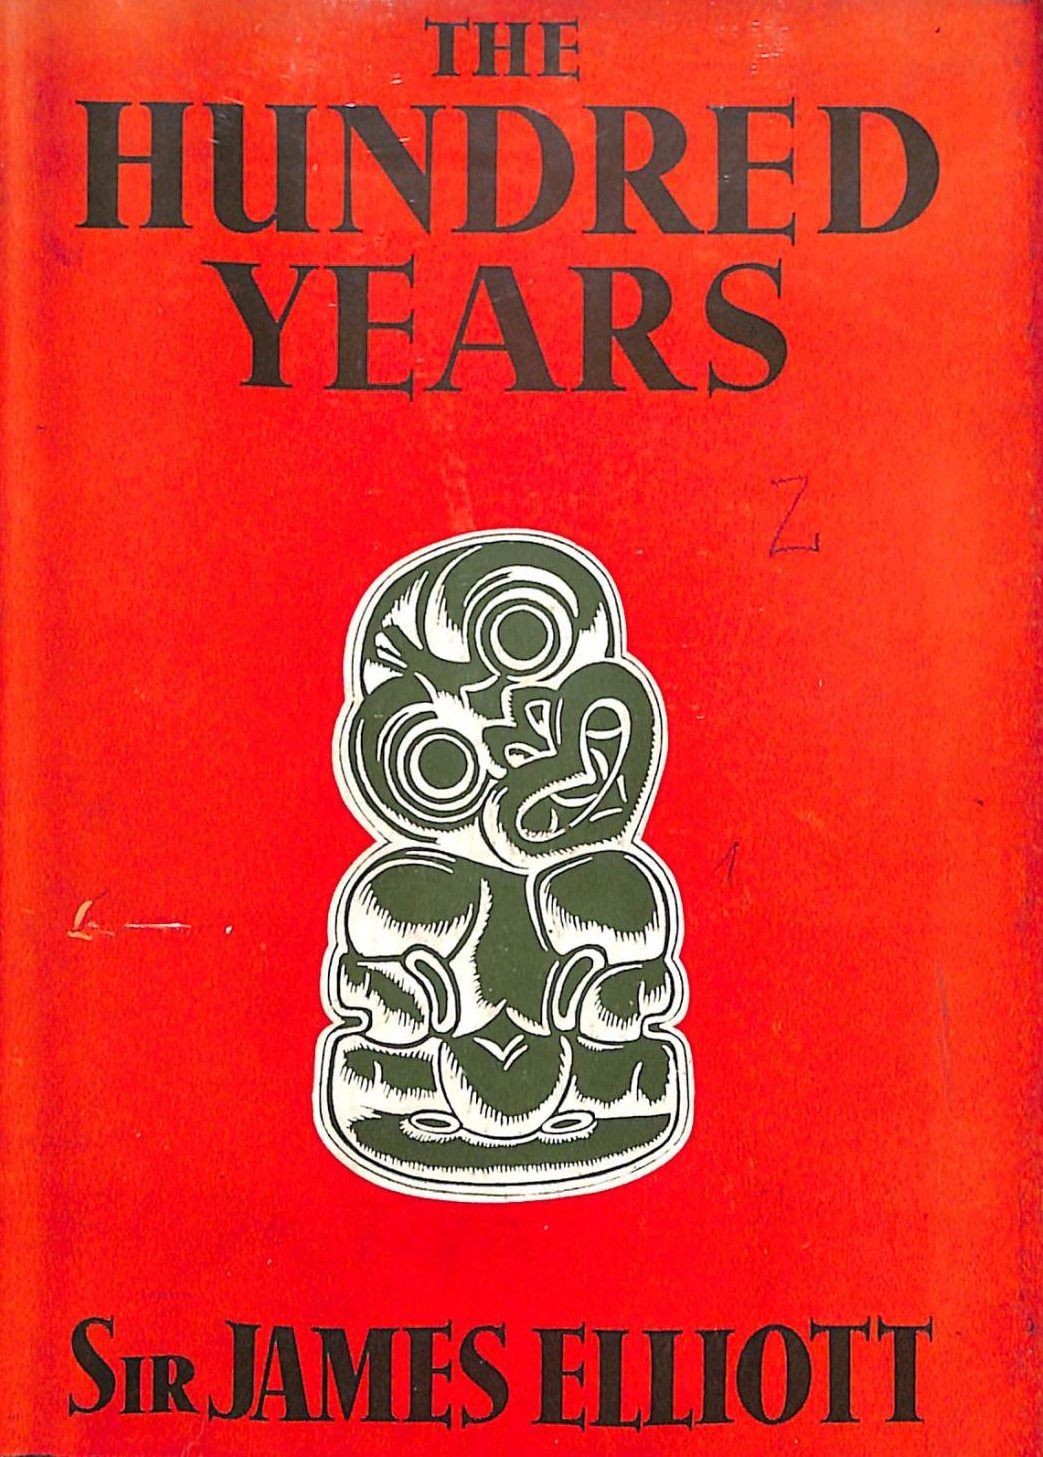 THE HUNDRED YEARS